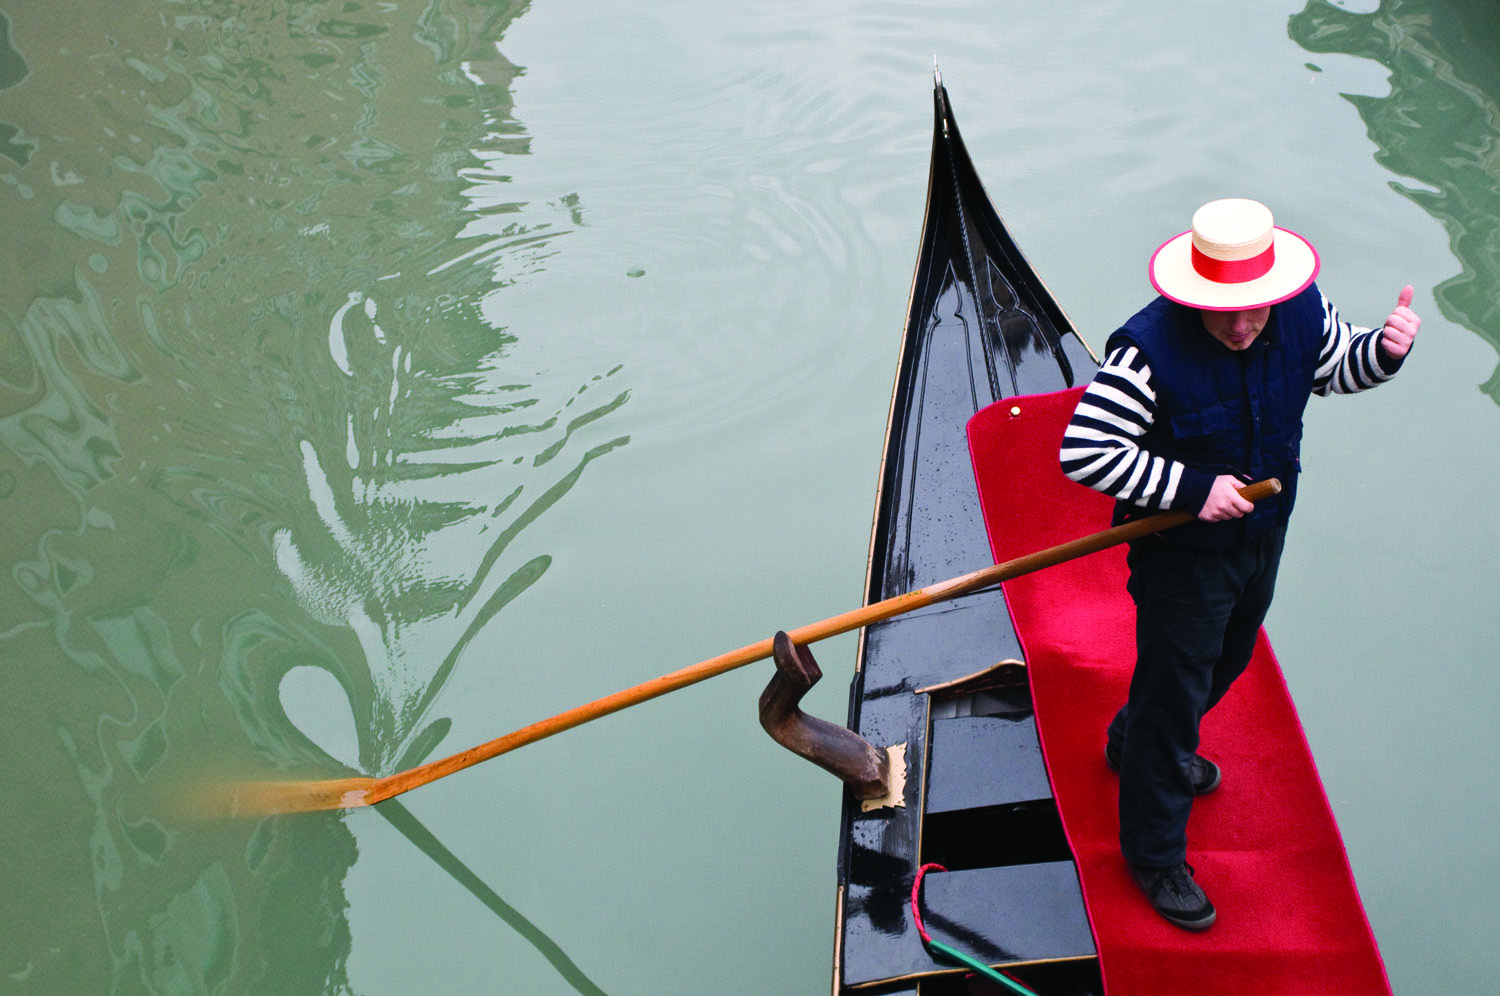 A gondolier gives a few explanations to his customers during a gondola ride